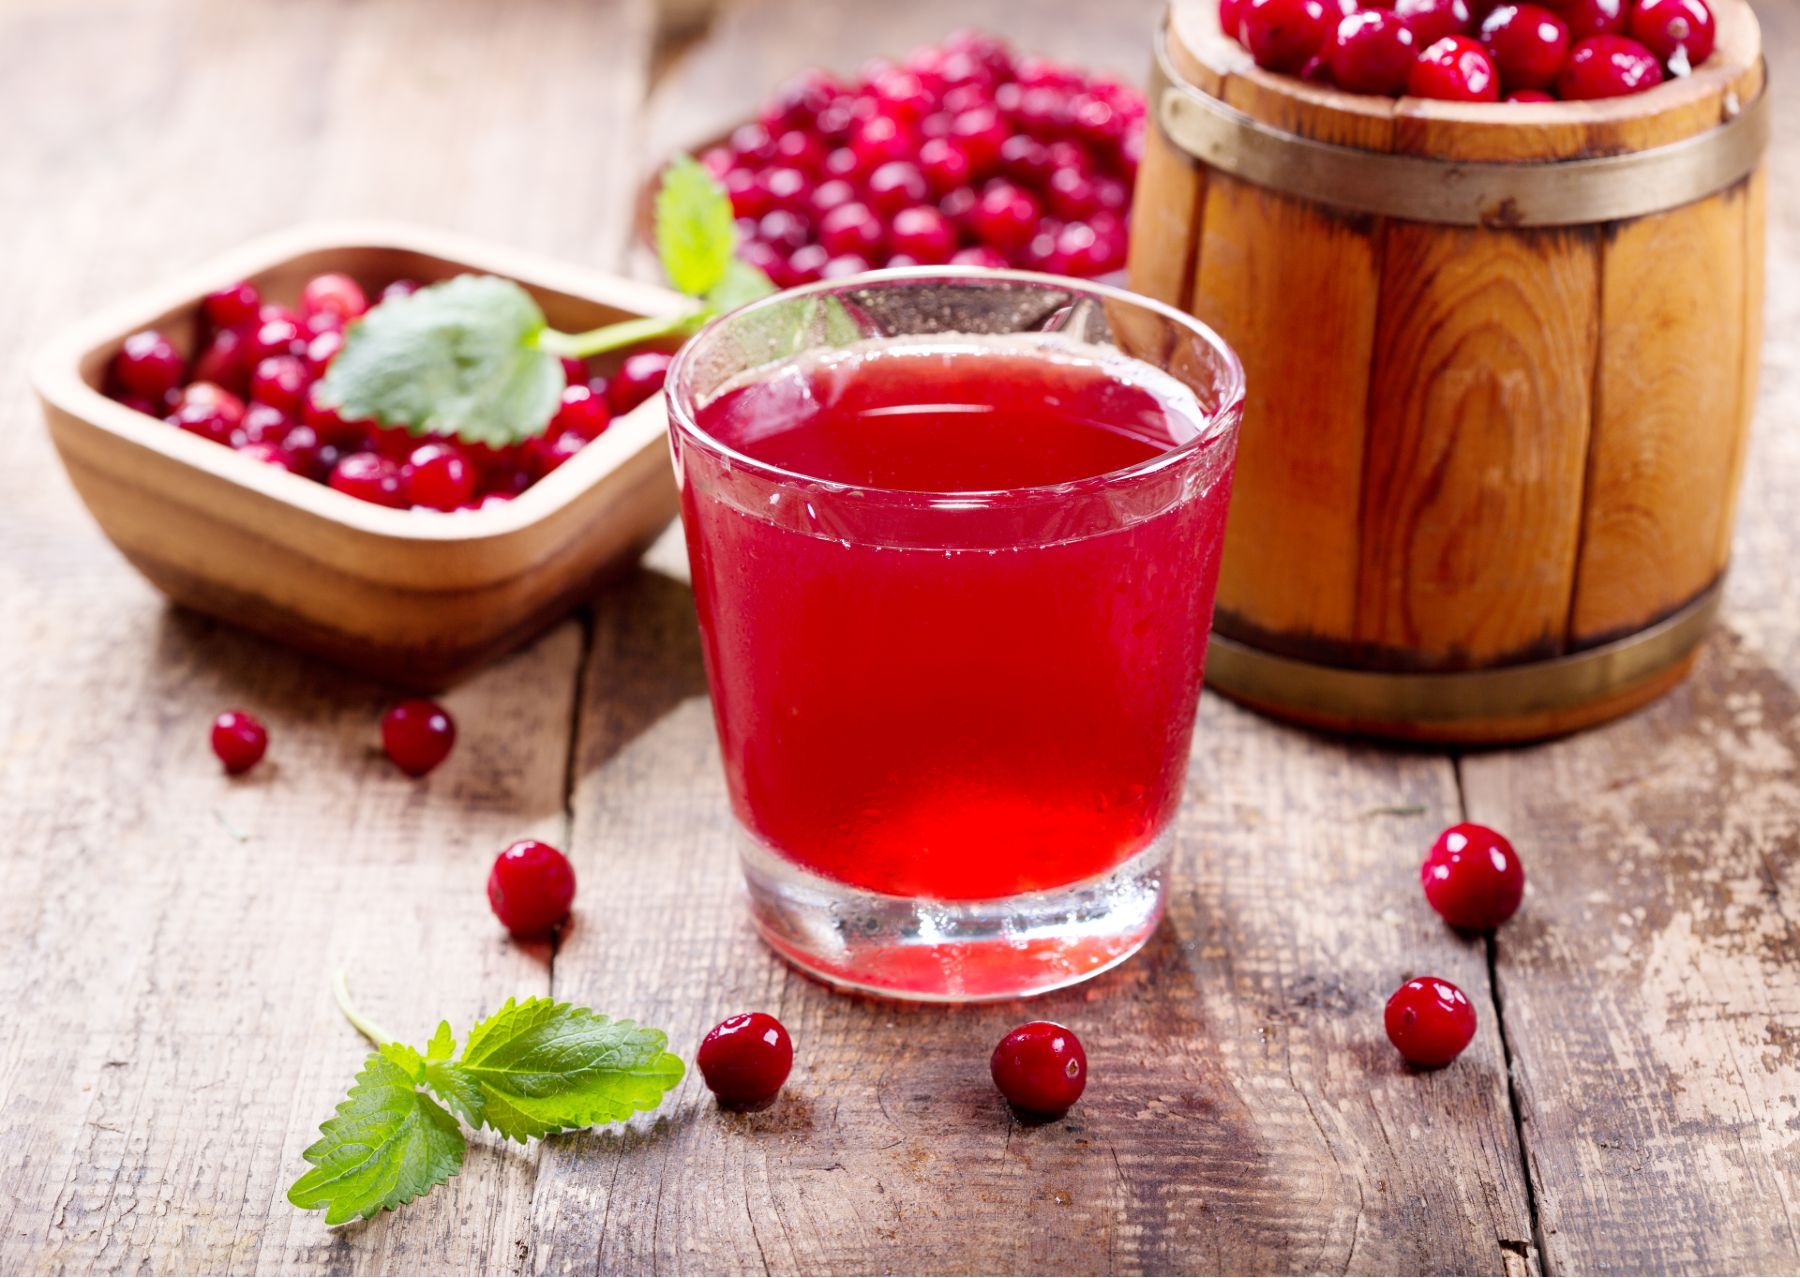 Cranberry juice in a glass surrounded by cranberries - Ocean Spray class action settlement